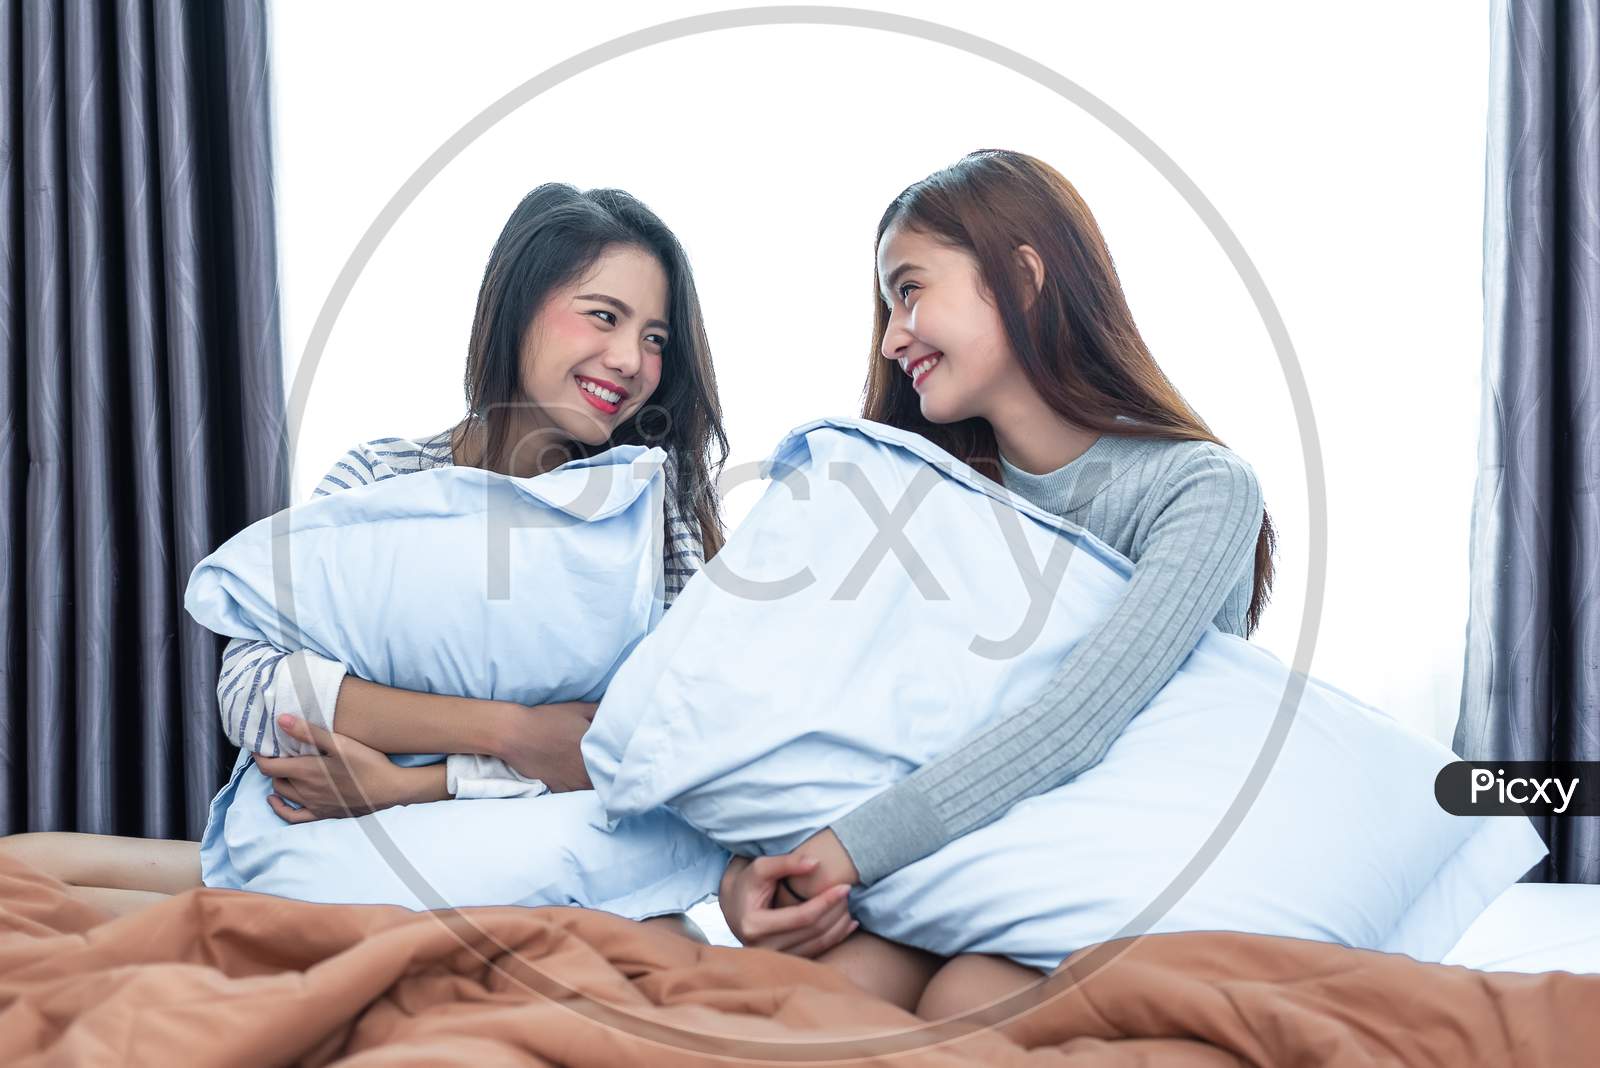 Two Asian Lesbian Looking Together In Bedroom.Beauty Concept. Happy Lifestyles And Home Sweet Home Theme. Cushion Pillow Element And Window Background. Lgbt Pride Theme.